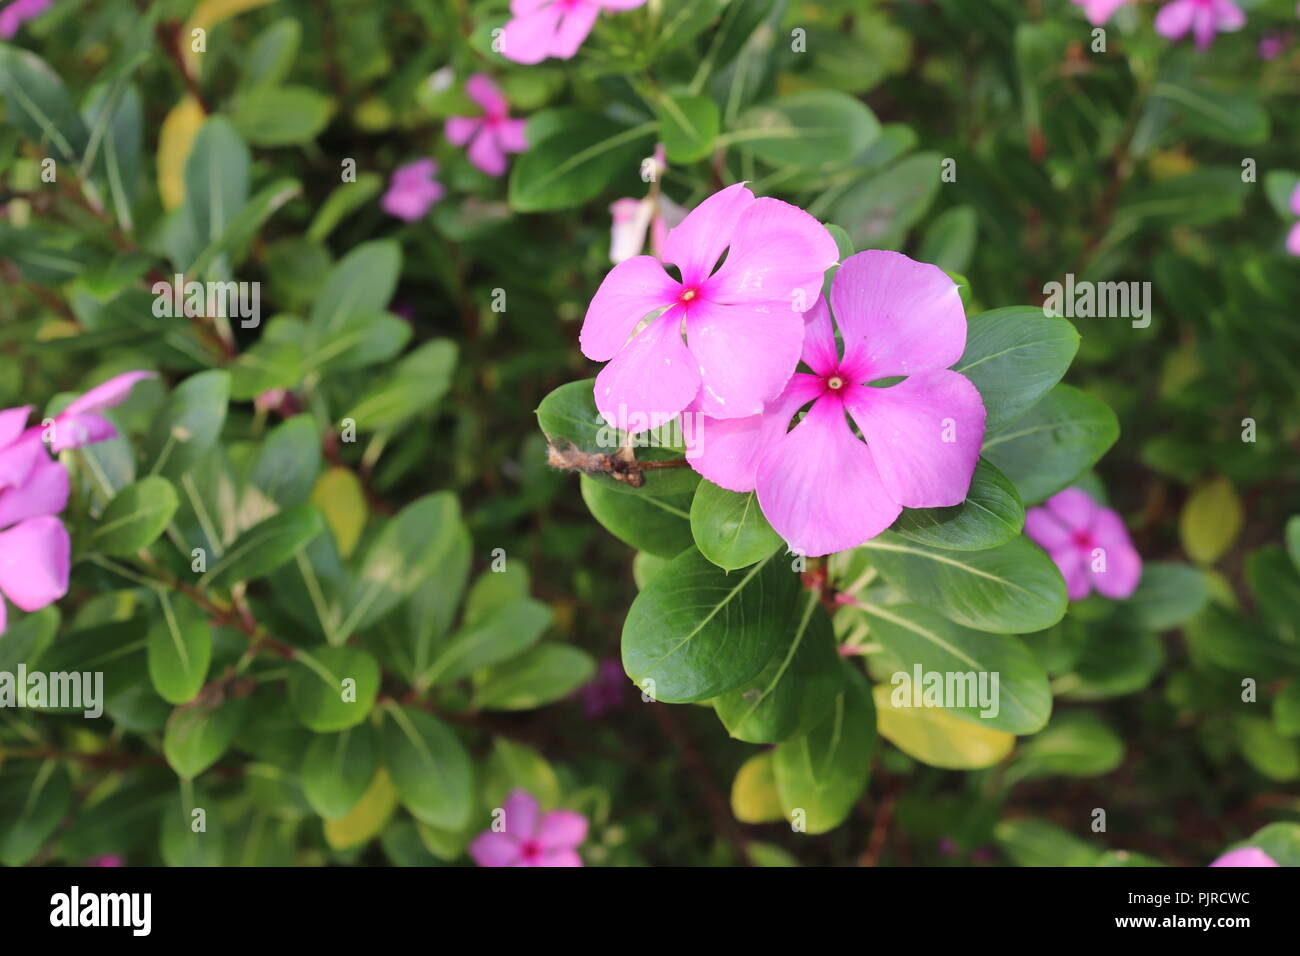 catharanthus roseus flowers with green leaf on blur Backgrounds.Noyantara, a plant, known for its reddish pink rose petal flowers.Cape periwinkle, Stock Photo